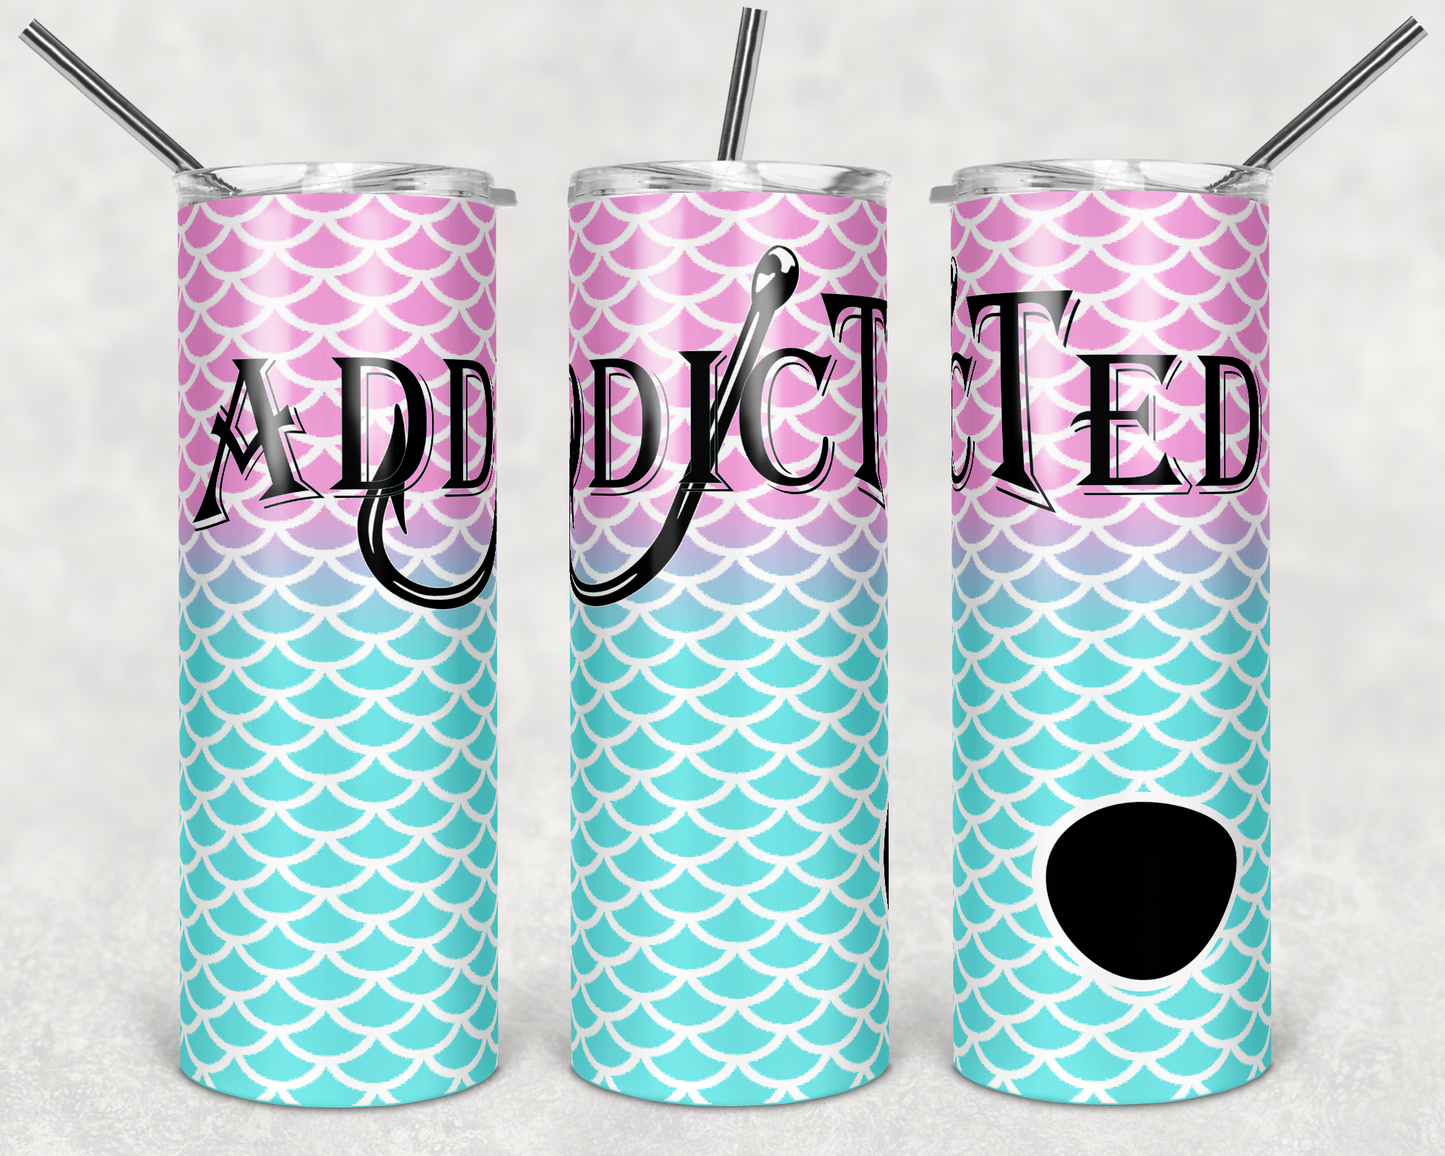 Addicted - Pink and Teal